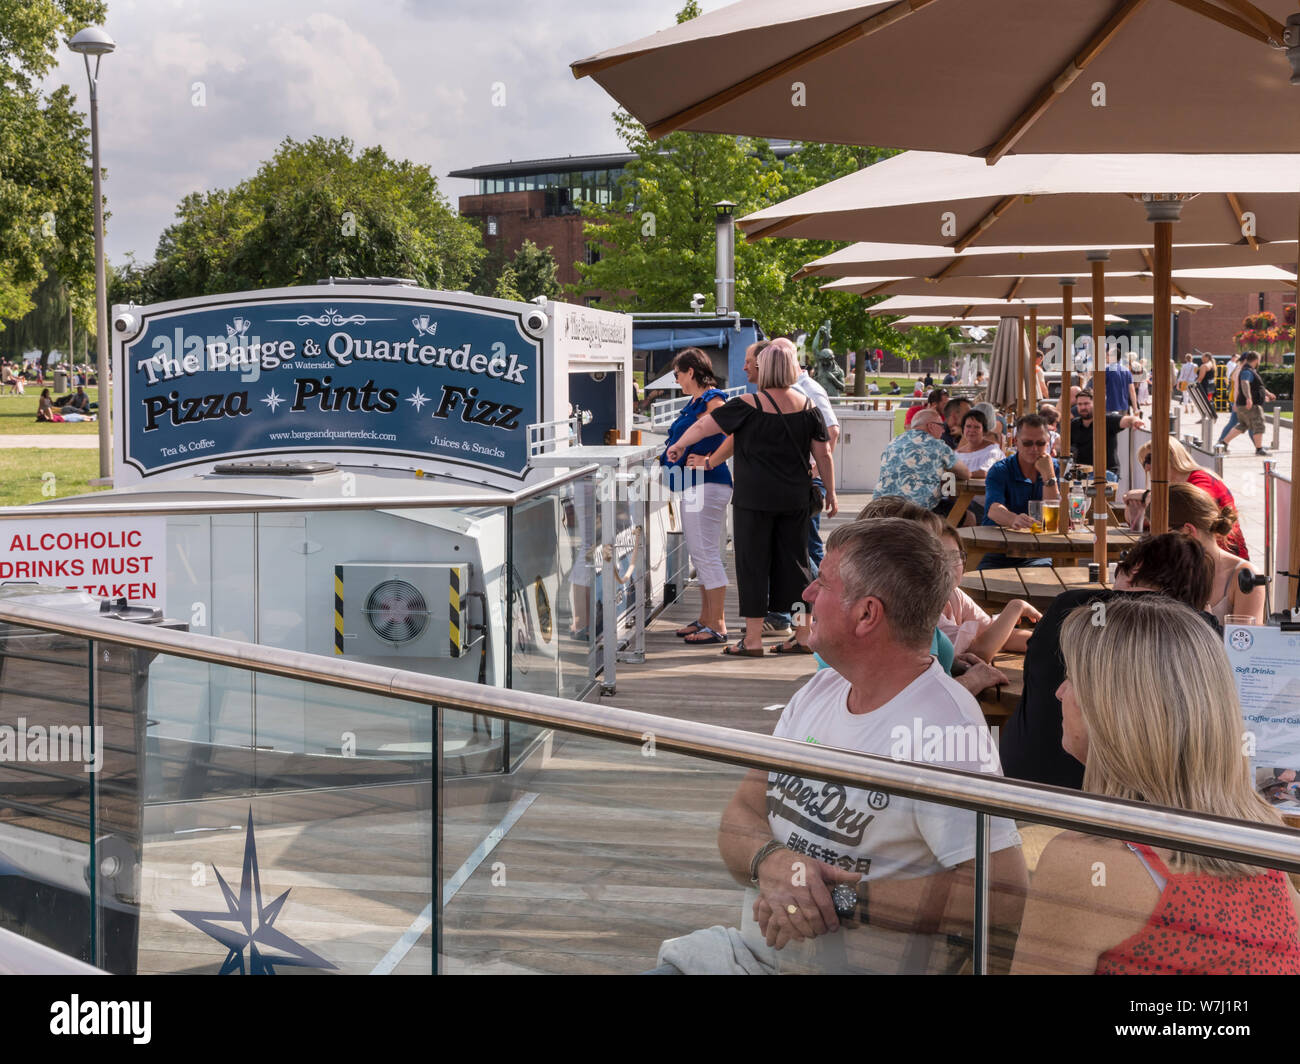 Cafes and restaurants. The Barge and Quarterdeck riverside bar and pizza place with outside diners under sunshades. Stock Photo